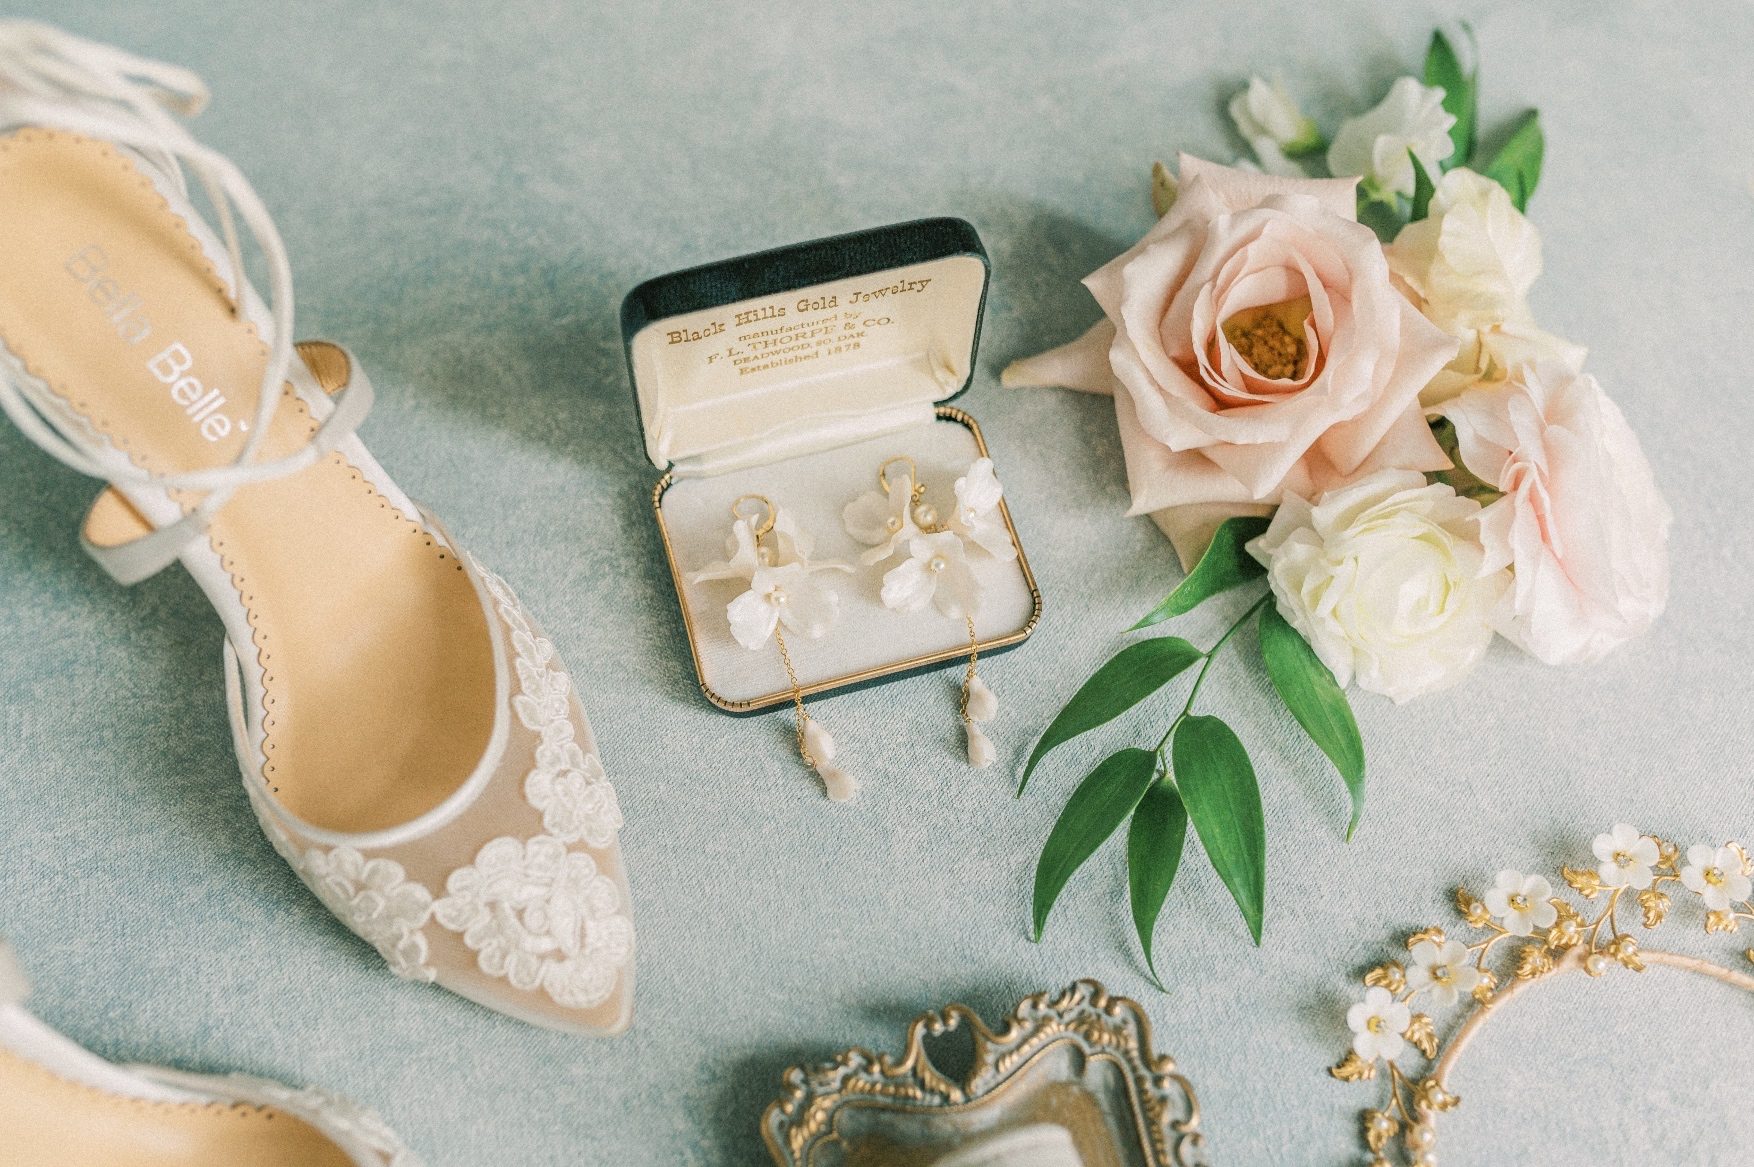 A close up of the floral earrings and shoes with a cluster of flowers